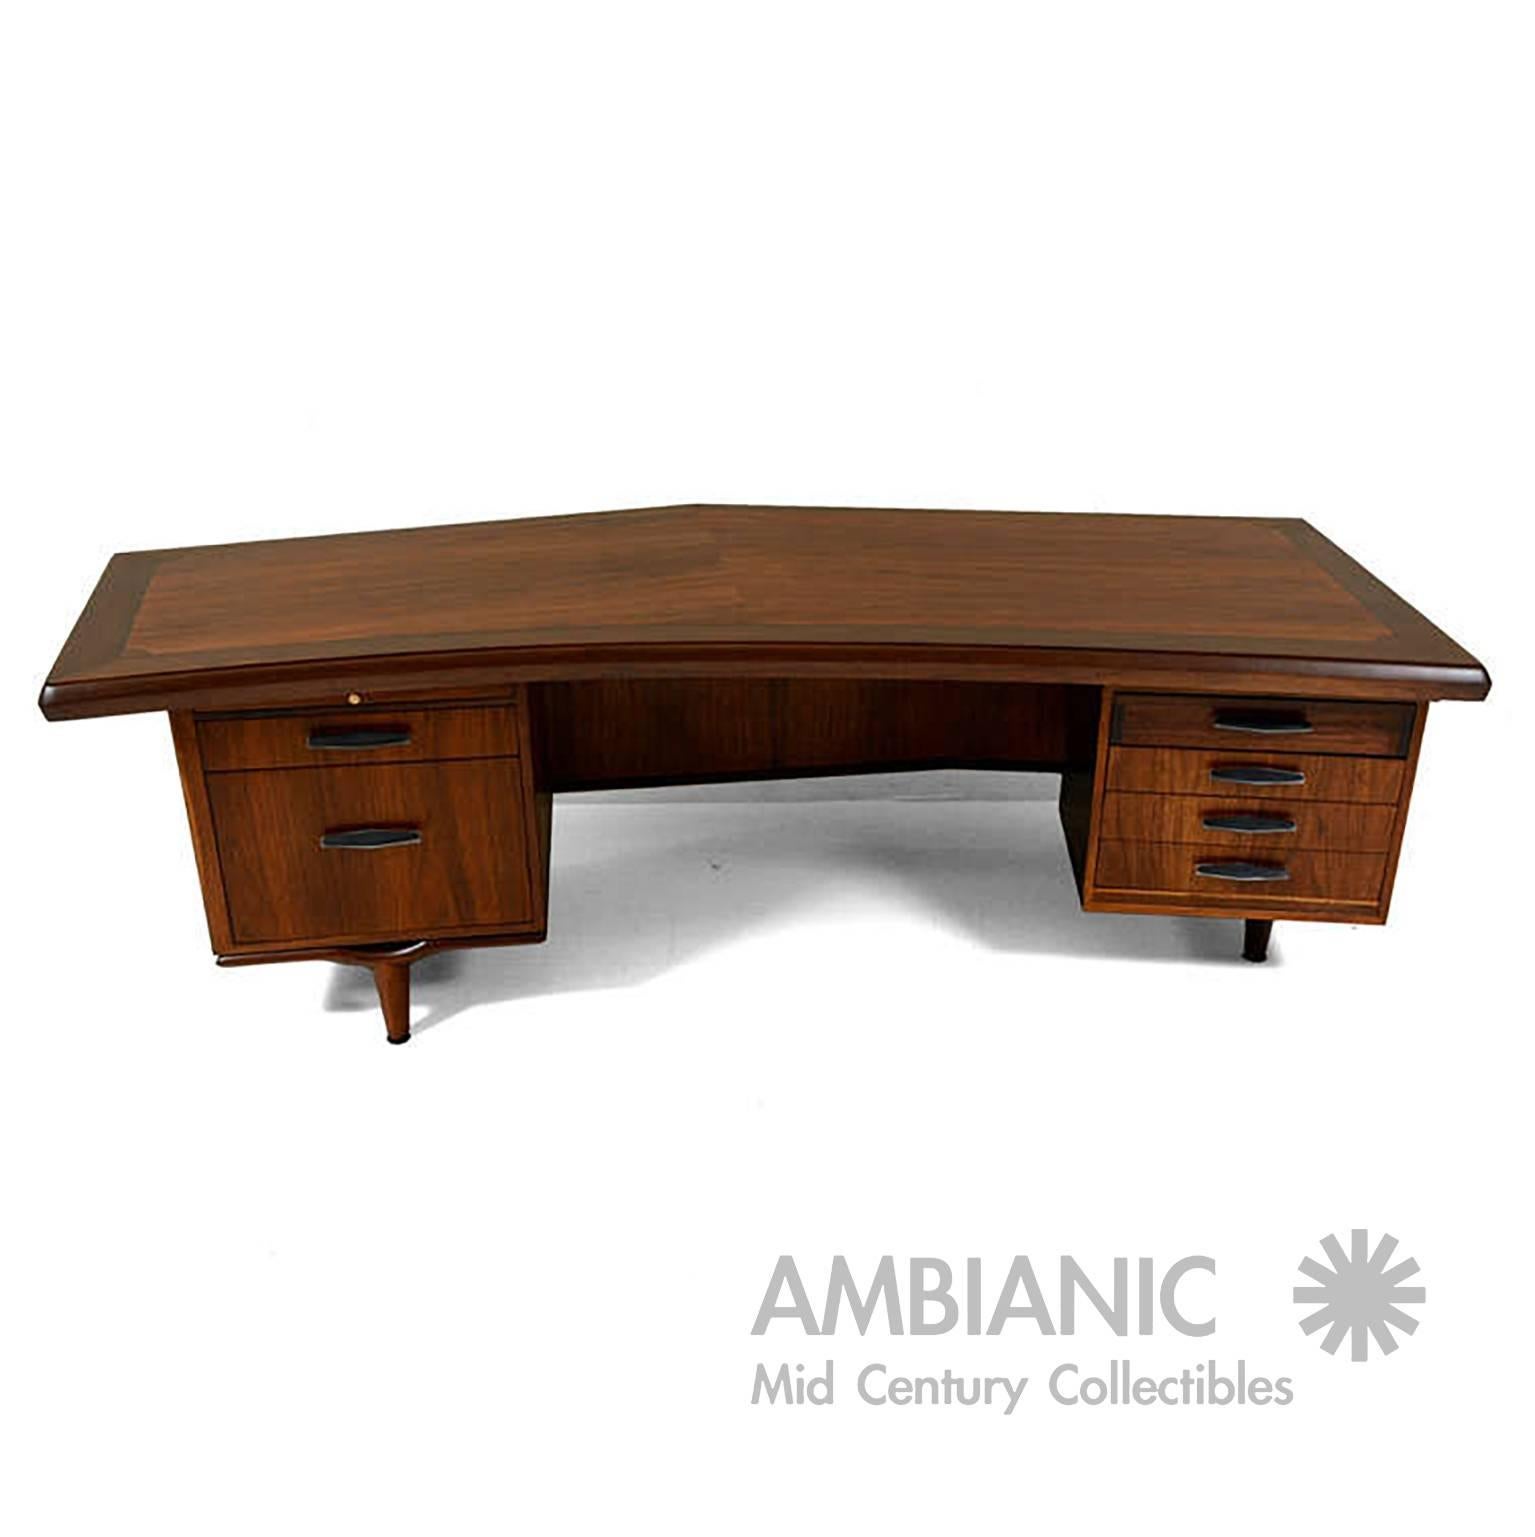 Executive desk in walnut wood by Maurice Bailey for Monteverdi & Young.
High quality craftsmanship.